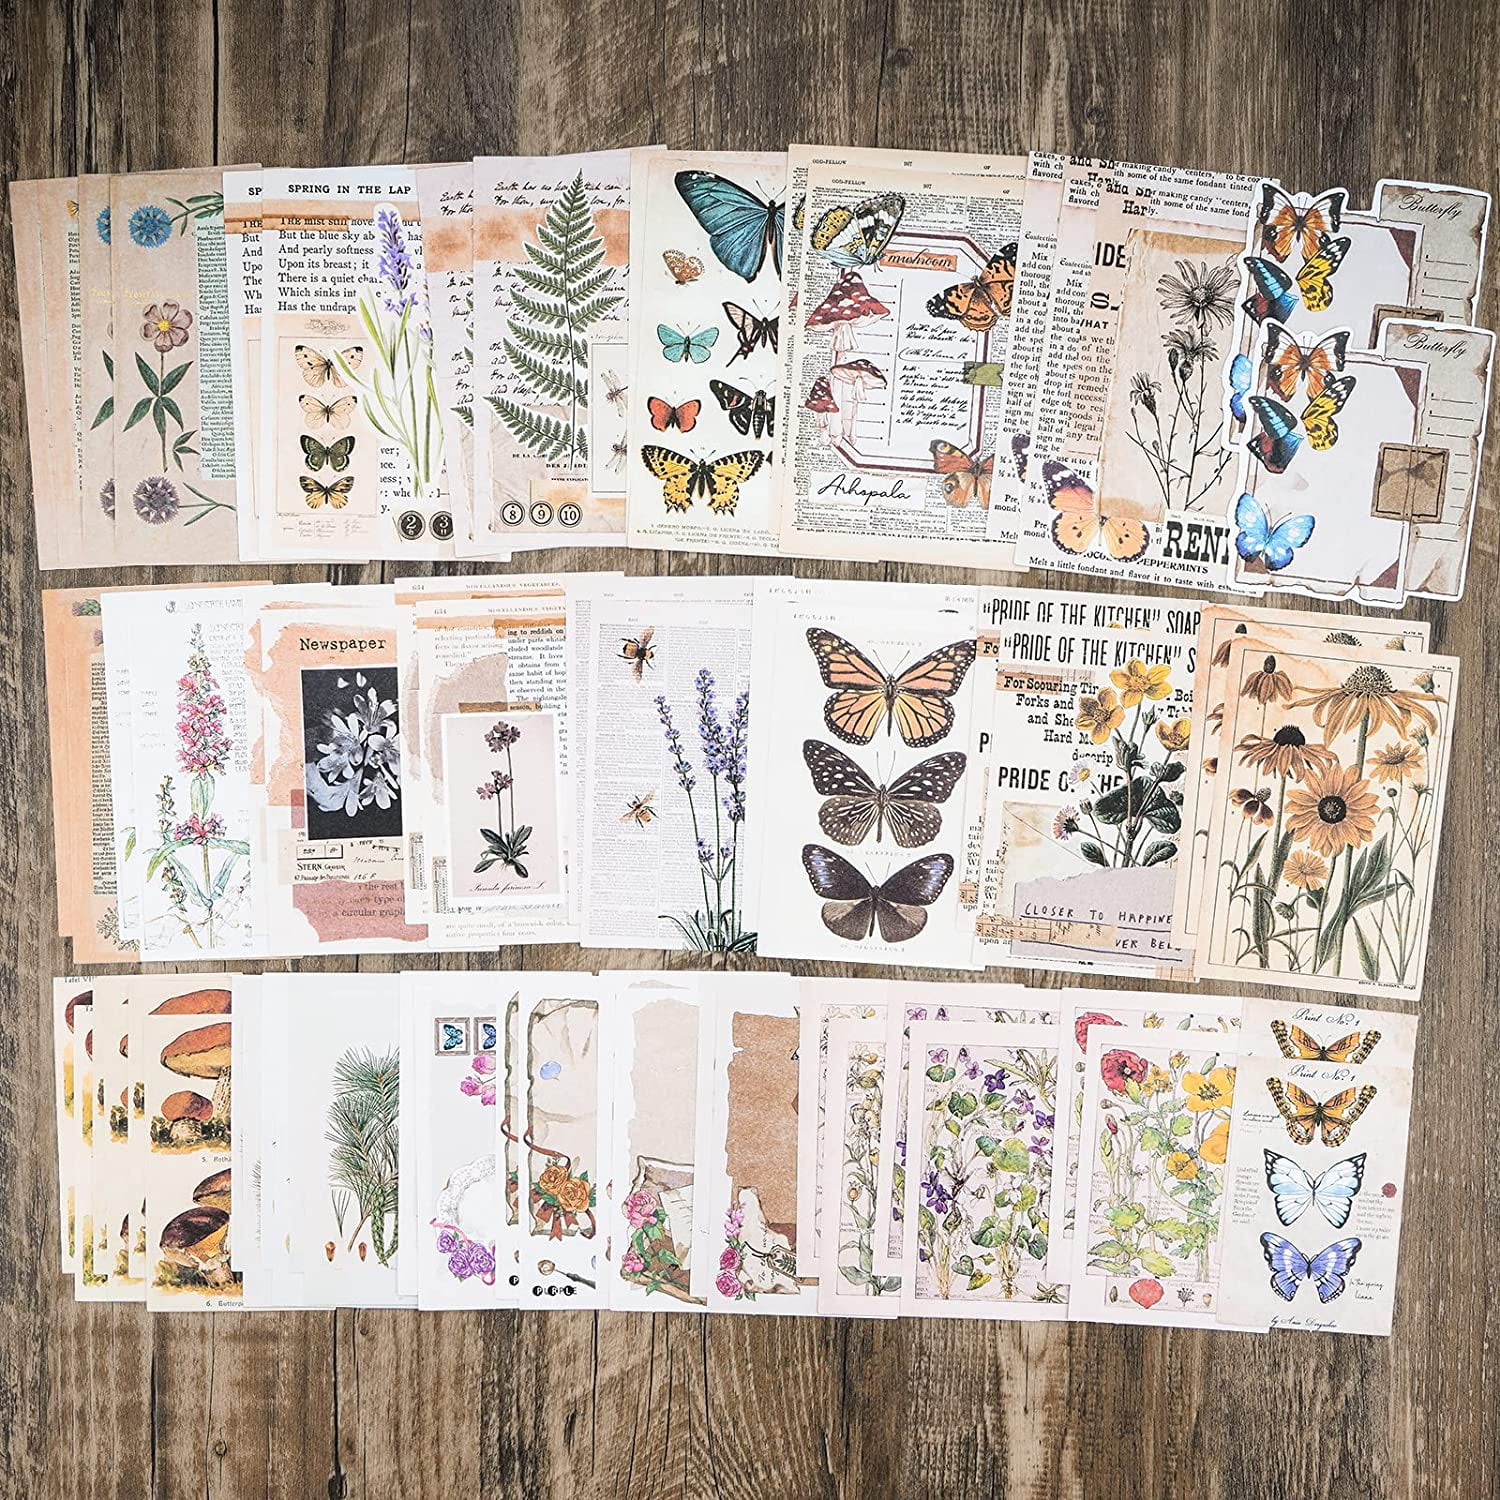 200 Pcs Scrapbooking Supplies Pack For Journaling Diy Vintage Scrapbook  Stickers Kit With Decorative Nature Retro